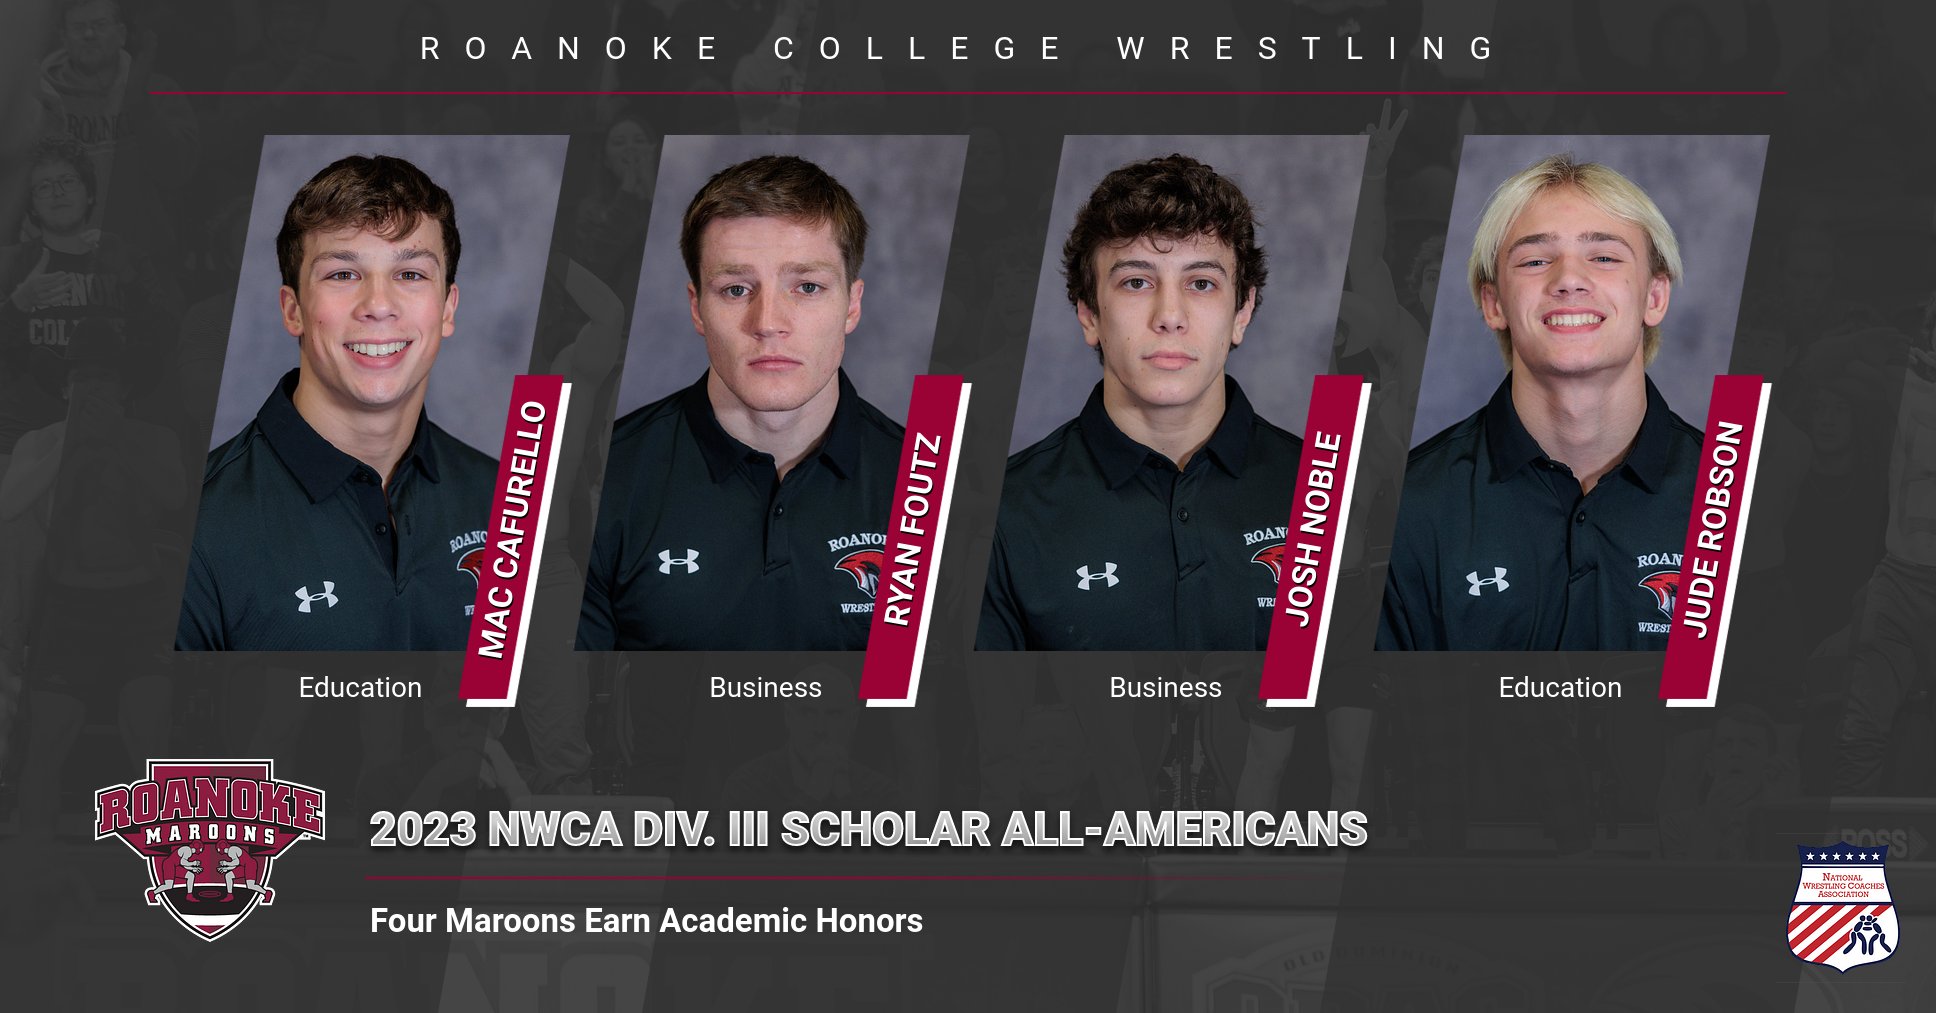 Four Maroons Earn NWCA Scholar All-American Honors